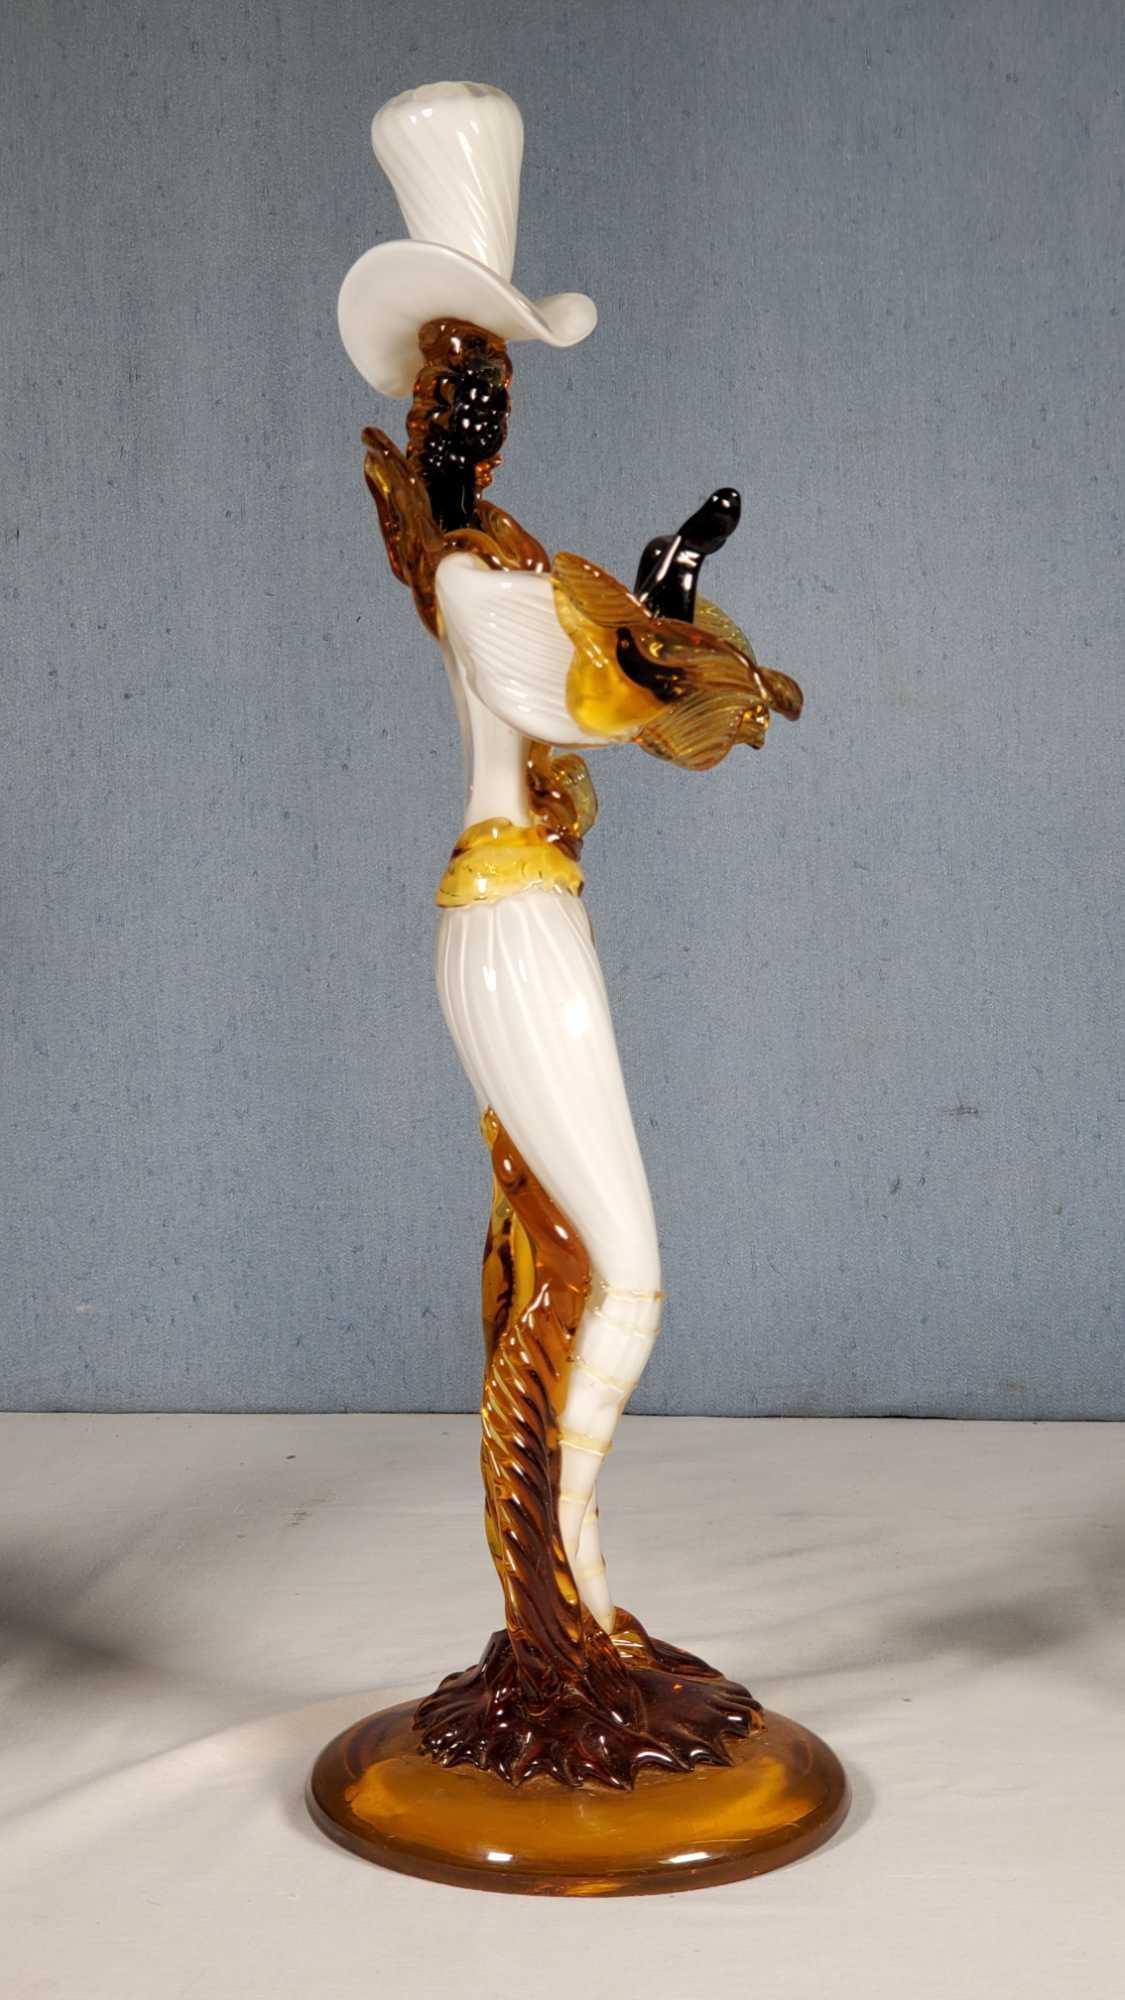 18" and 12" Murano Glass Courtier Figurines